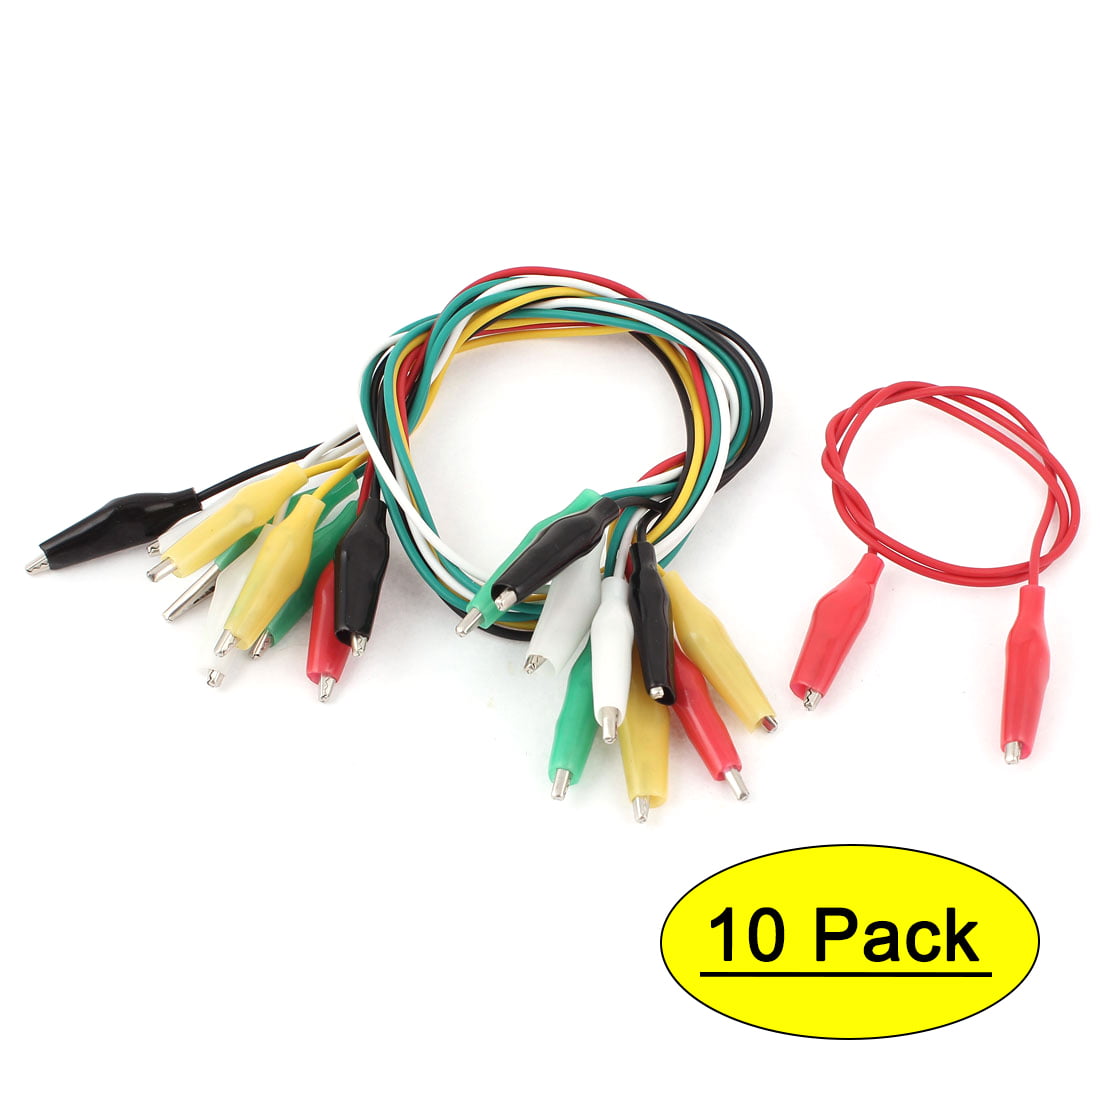 10X 50MM ALLIGATOR CLIPS CROCODILE ELECTRICAL TEST LEAD AMP VOLT CLAMP CHARGER 